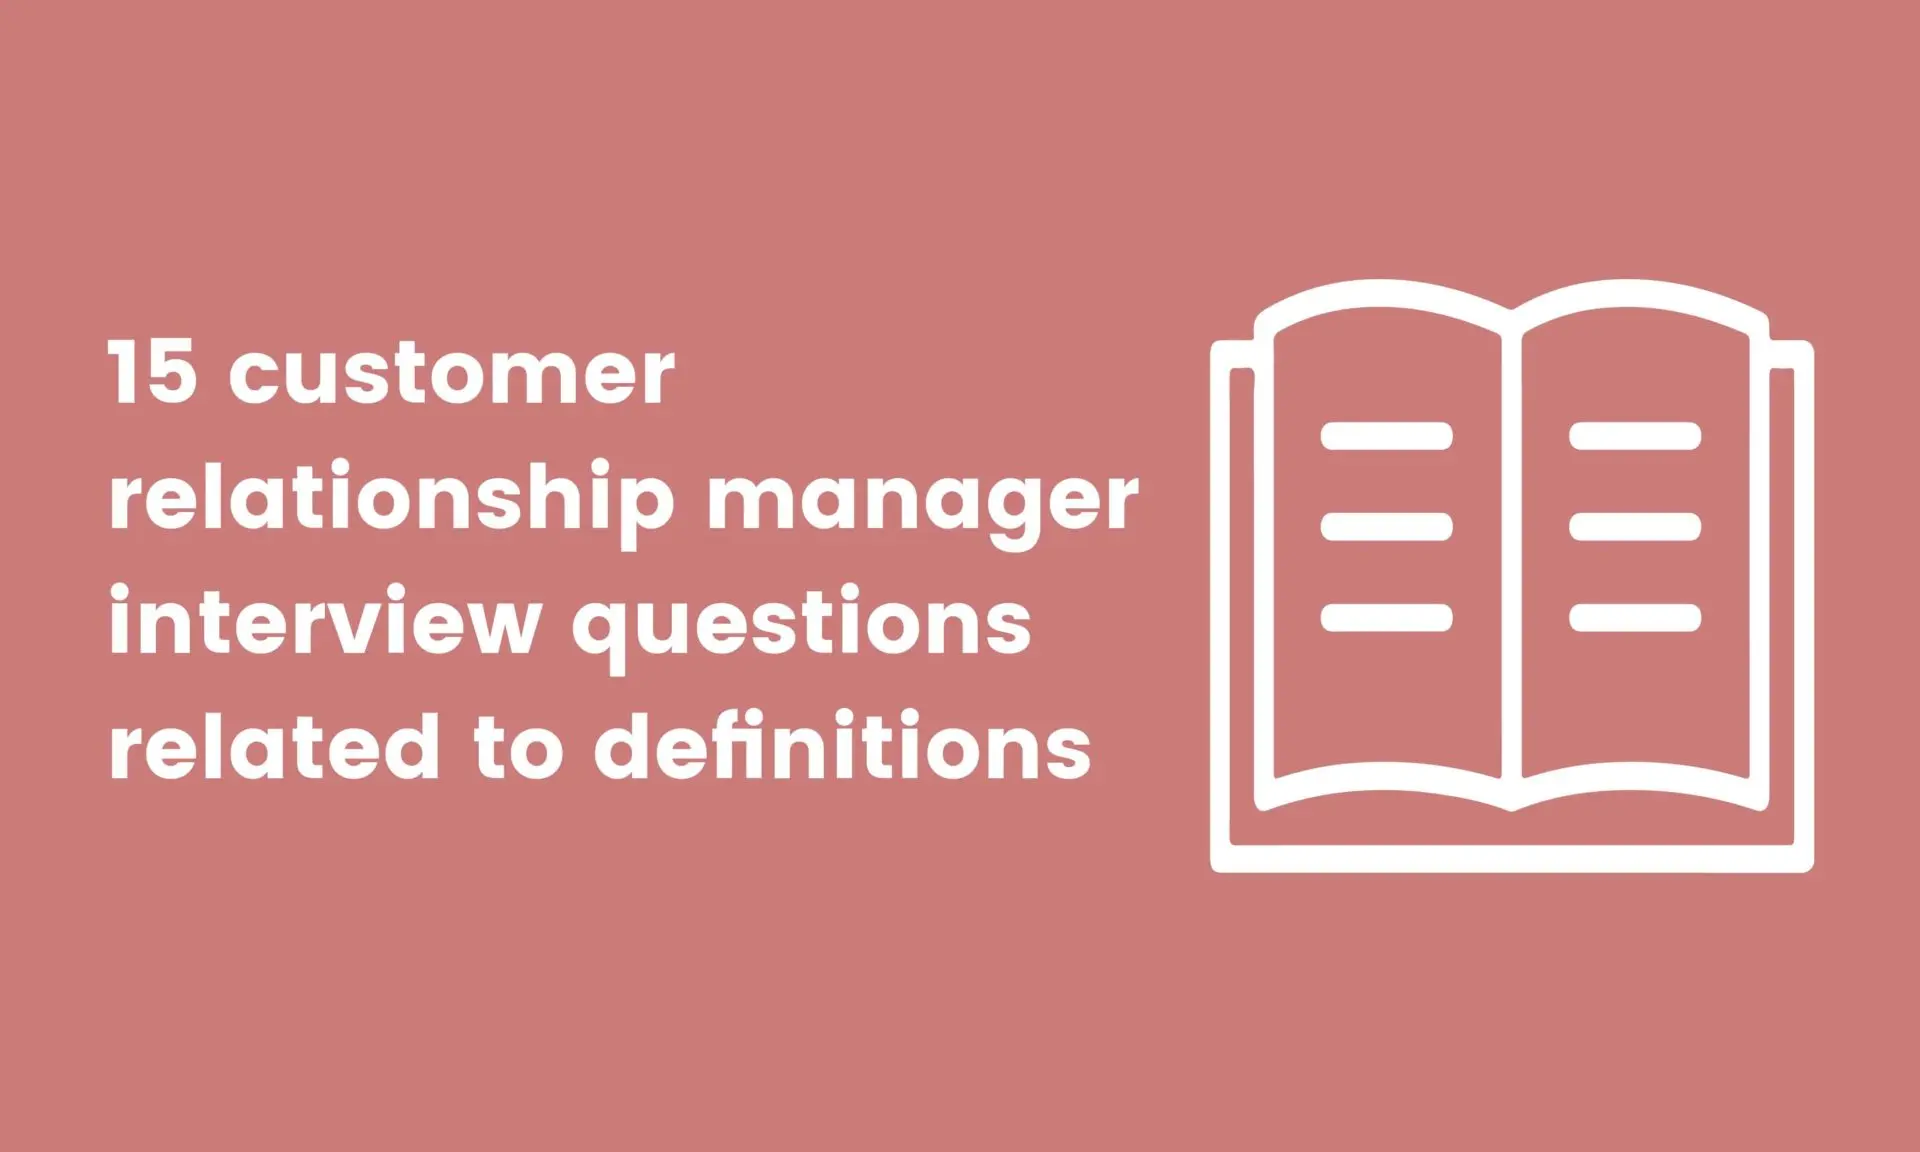 15 customer relationship manager interview questions related to definitions